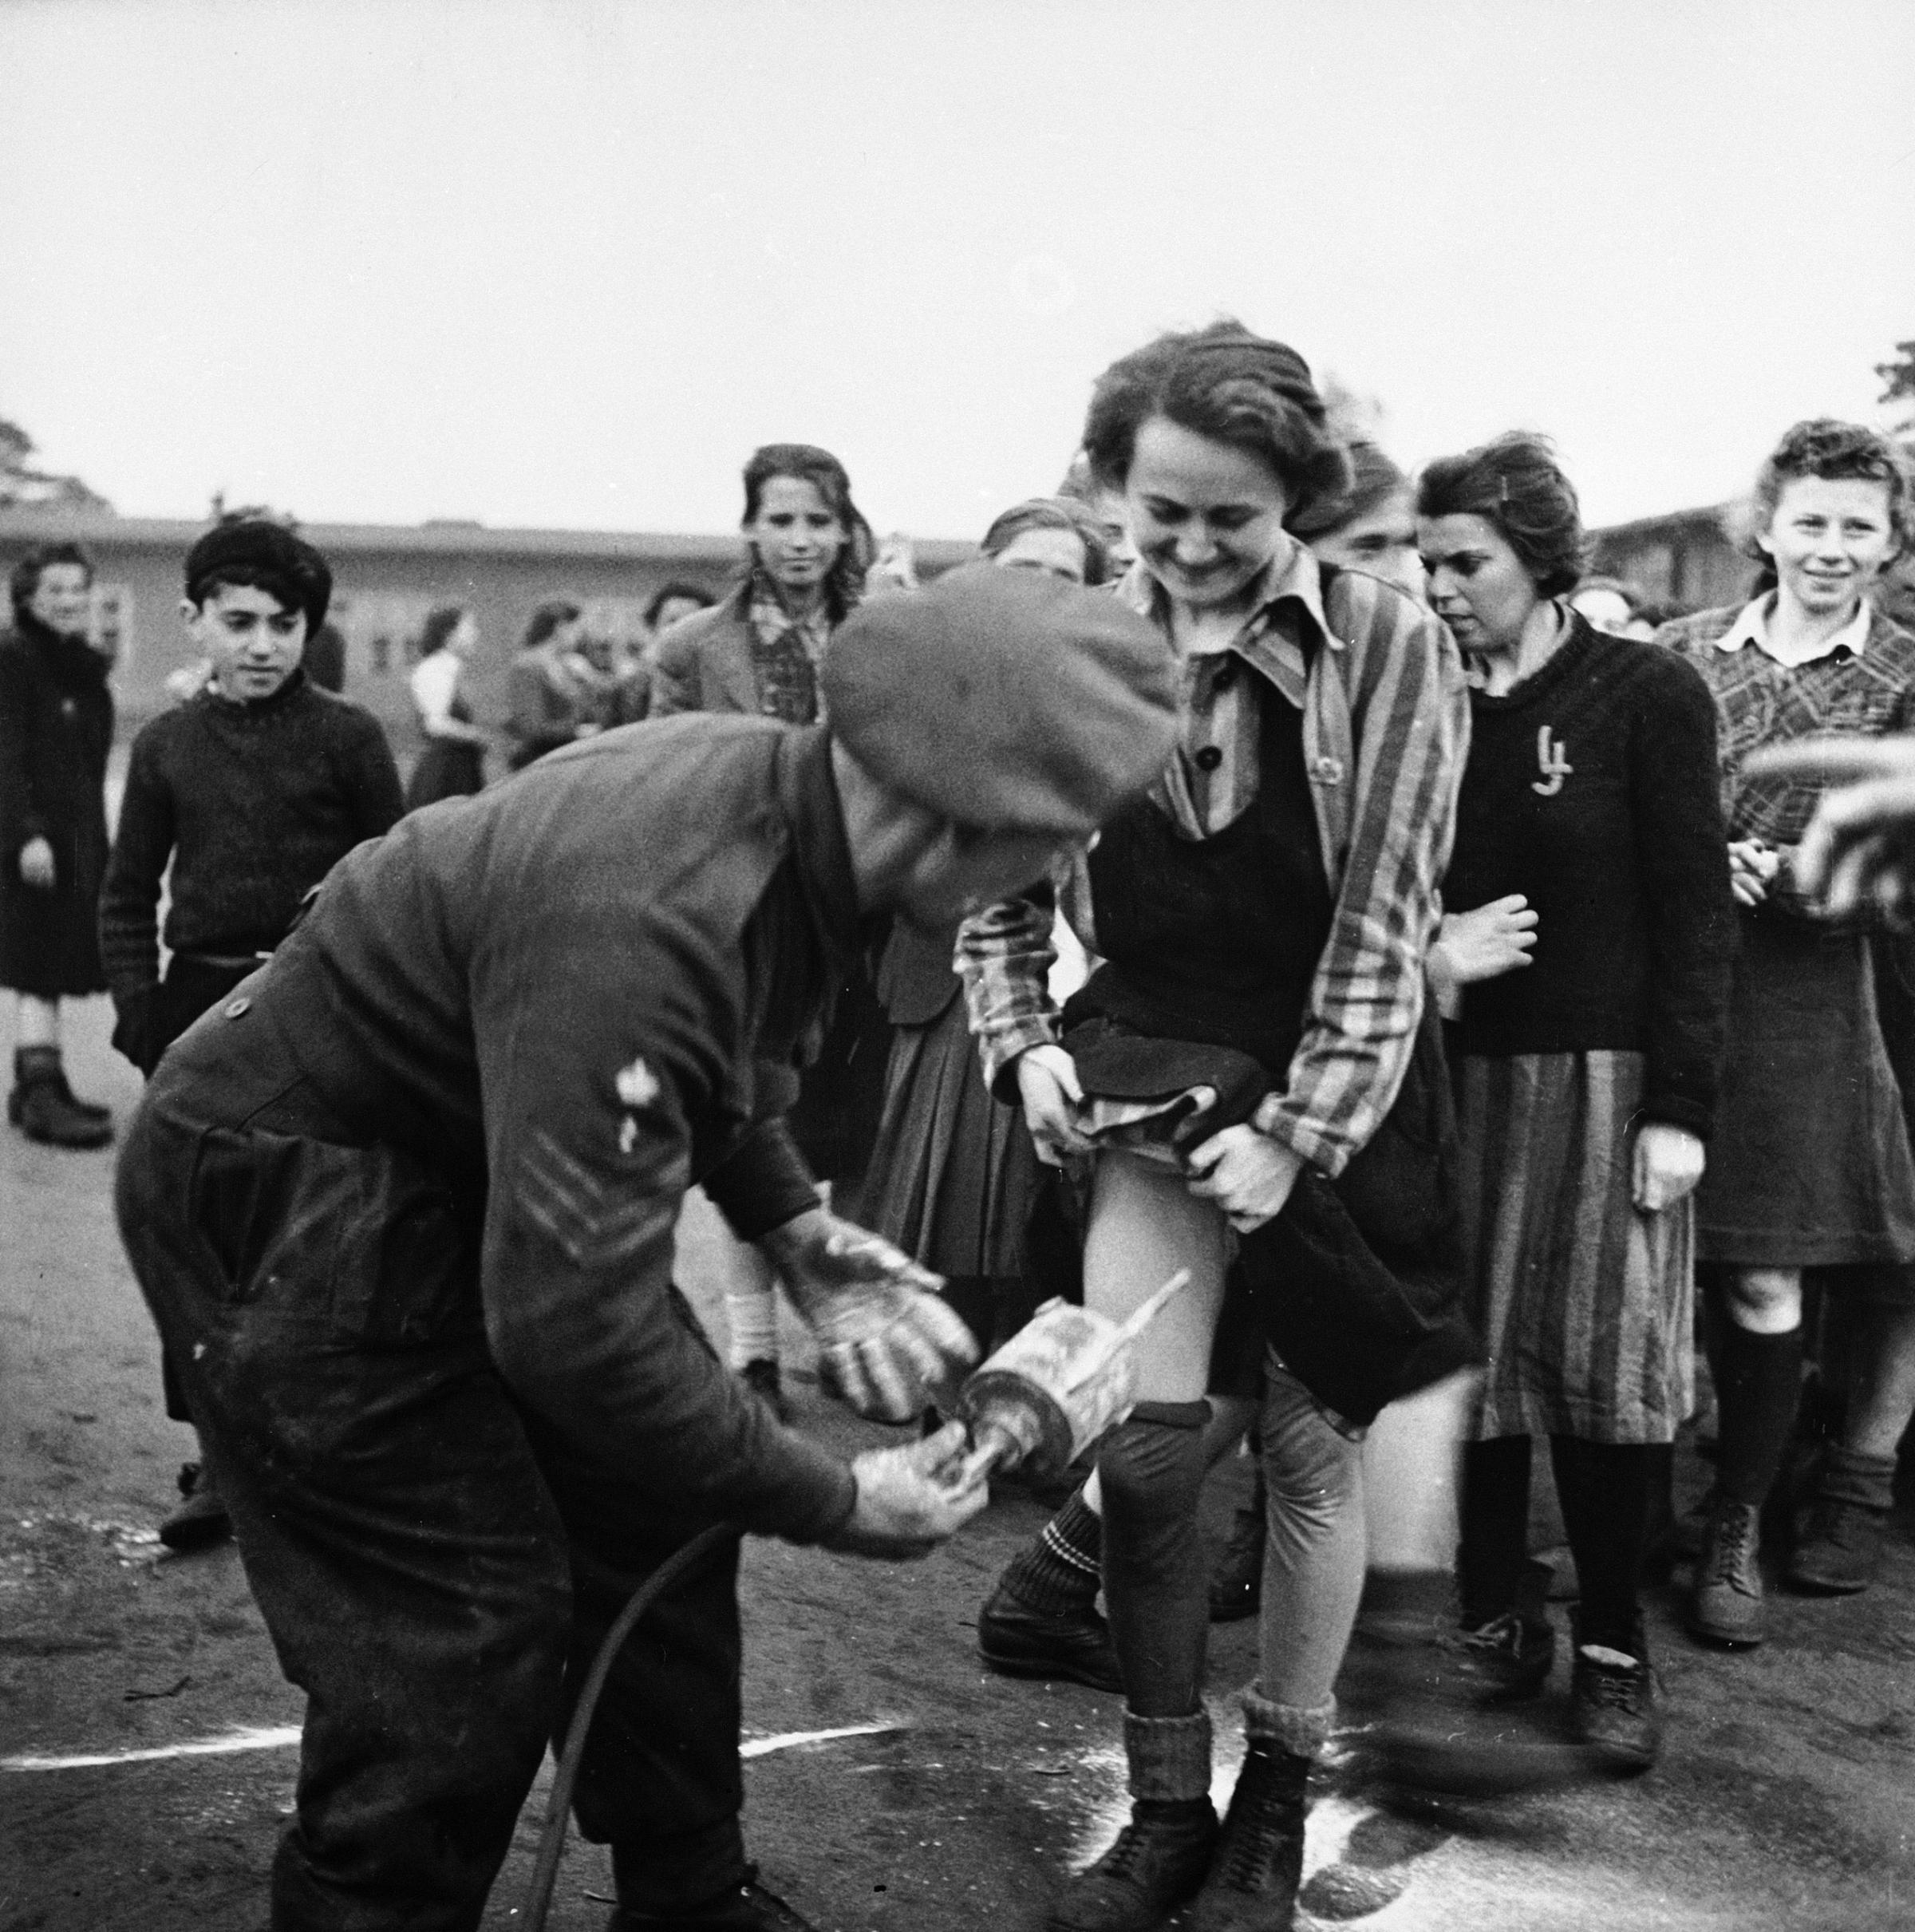 A British doctor administers delousing treatment of DDT up the skirt of an embarrassed-looking female prisoner at Bergen-Belsen, 1945.